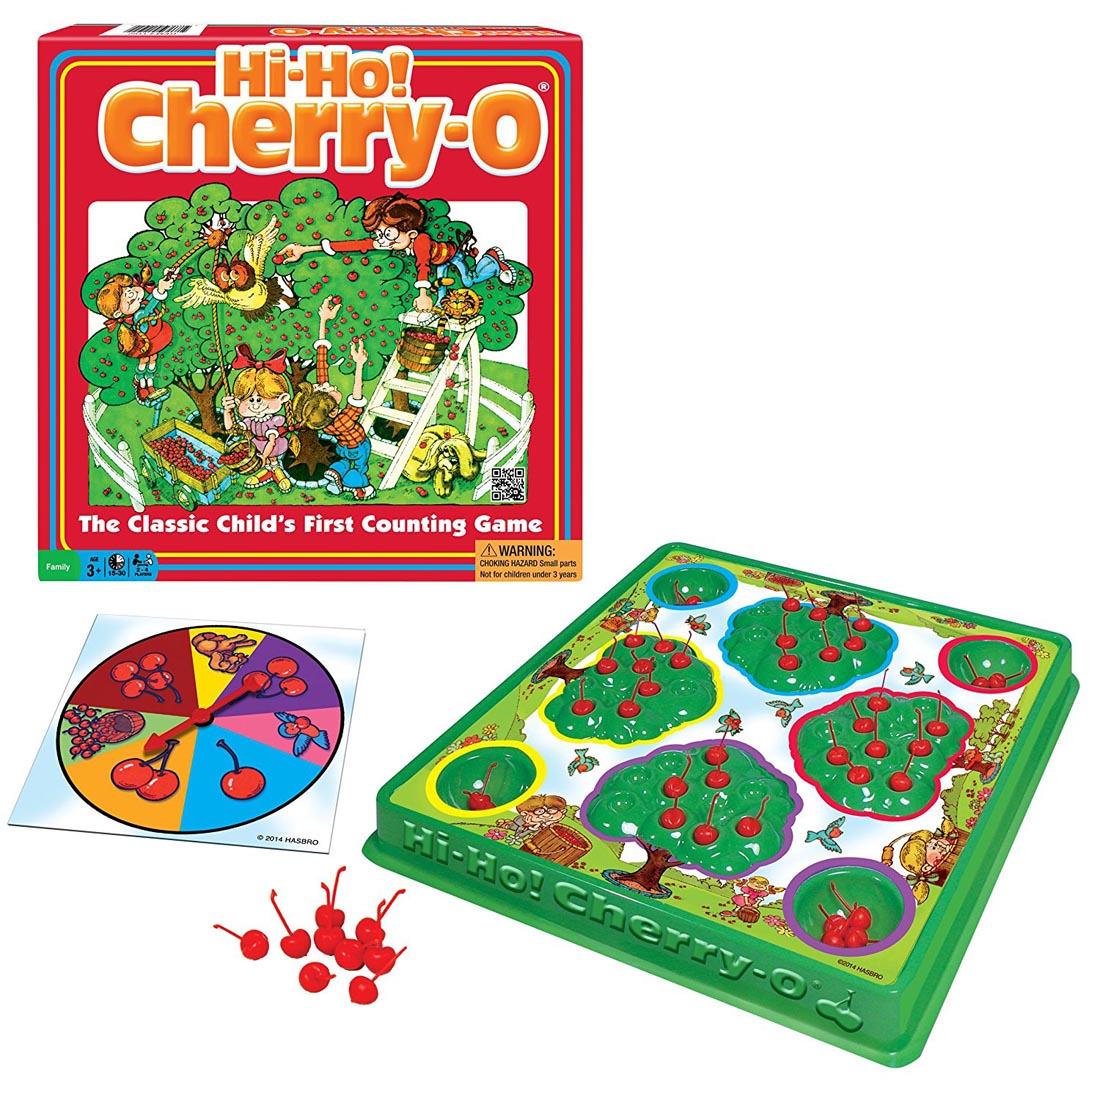 box and contents of Hi-Ho! Cherry-O! Game